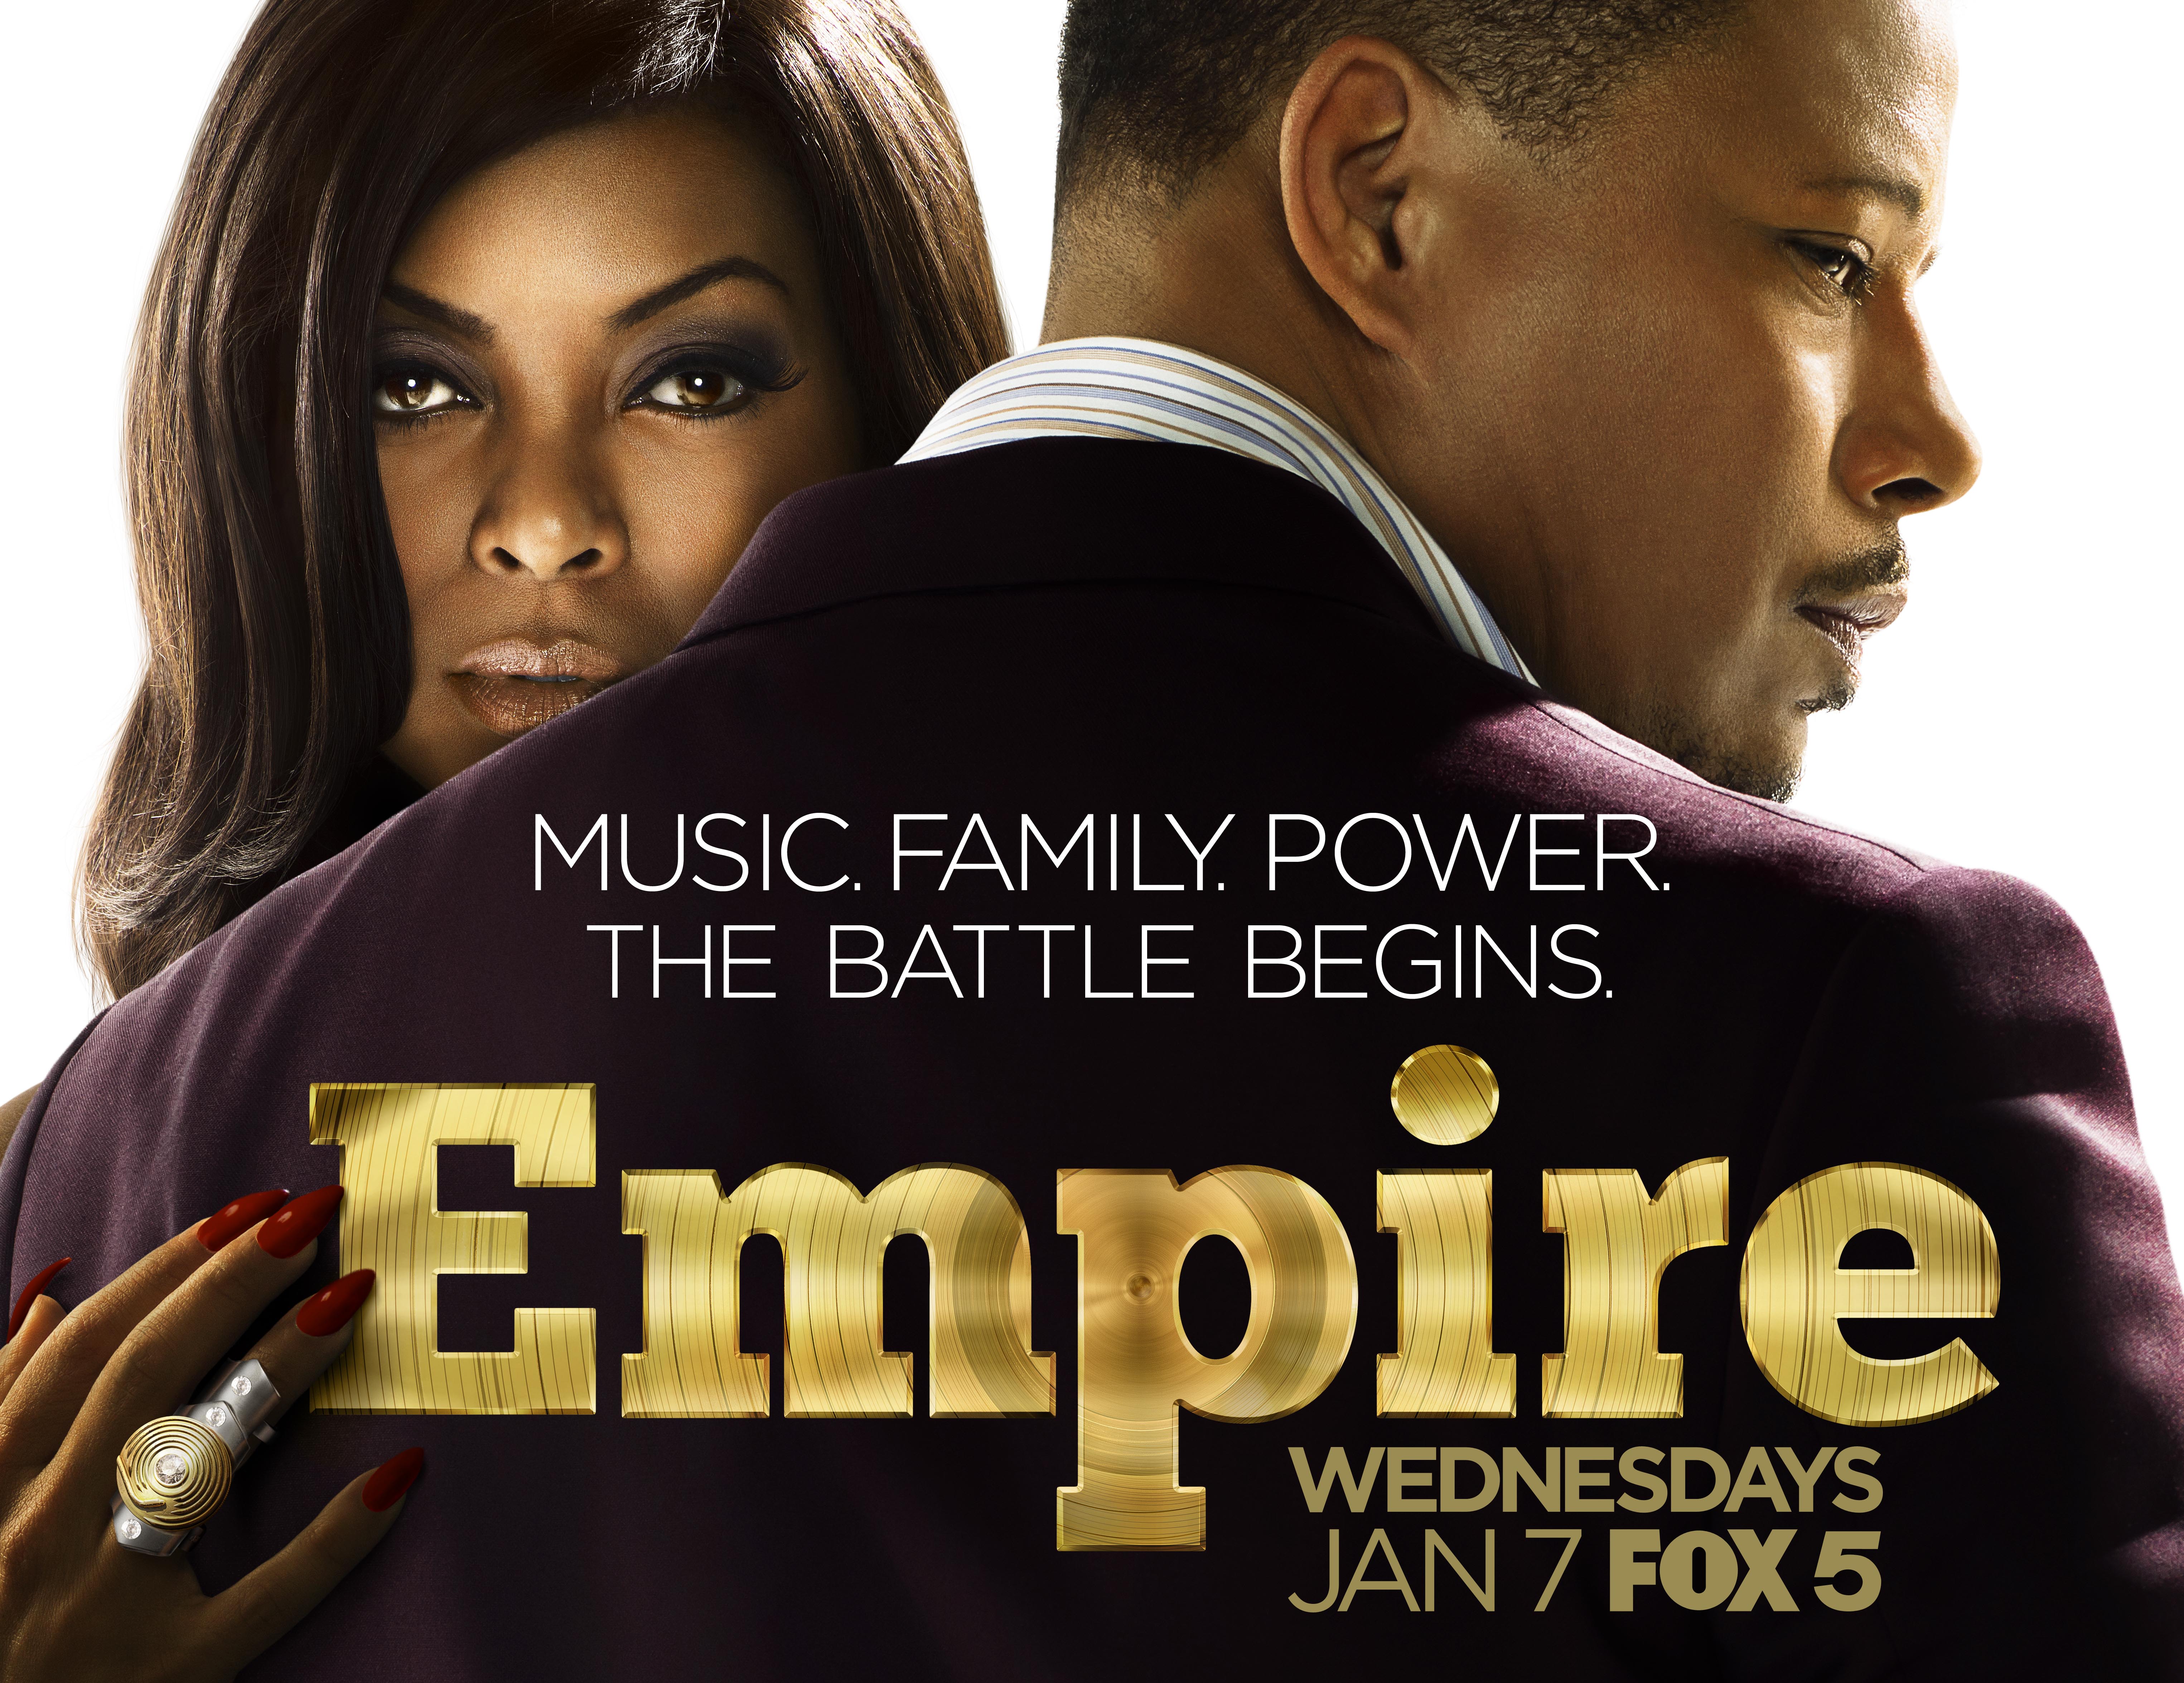 FOX presents: Empire Tuesday | December 9 7:30 pm | AMC Pacific Place  From Academy